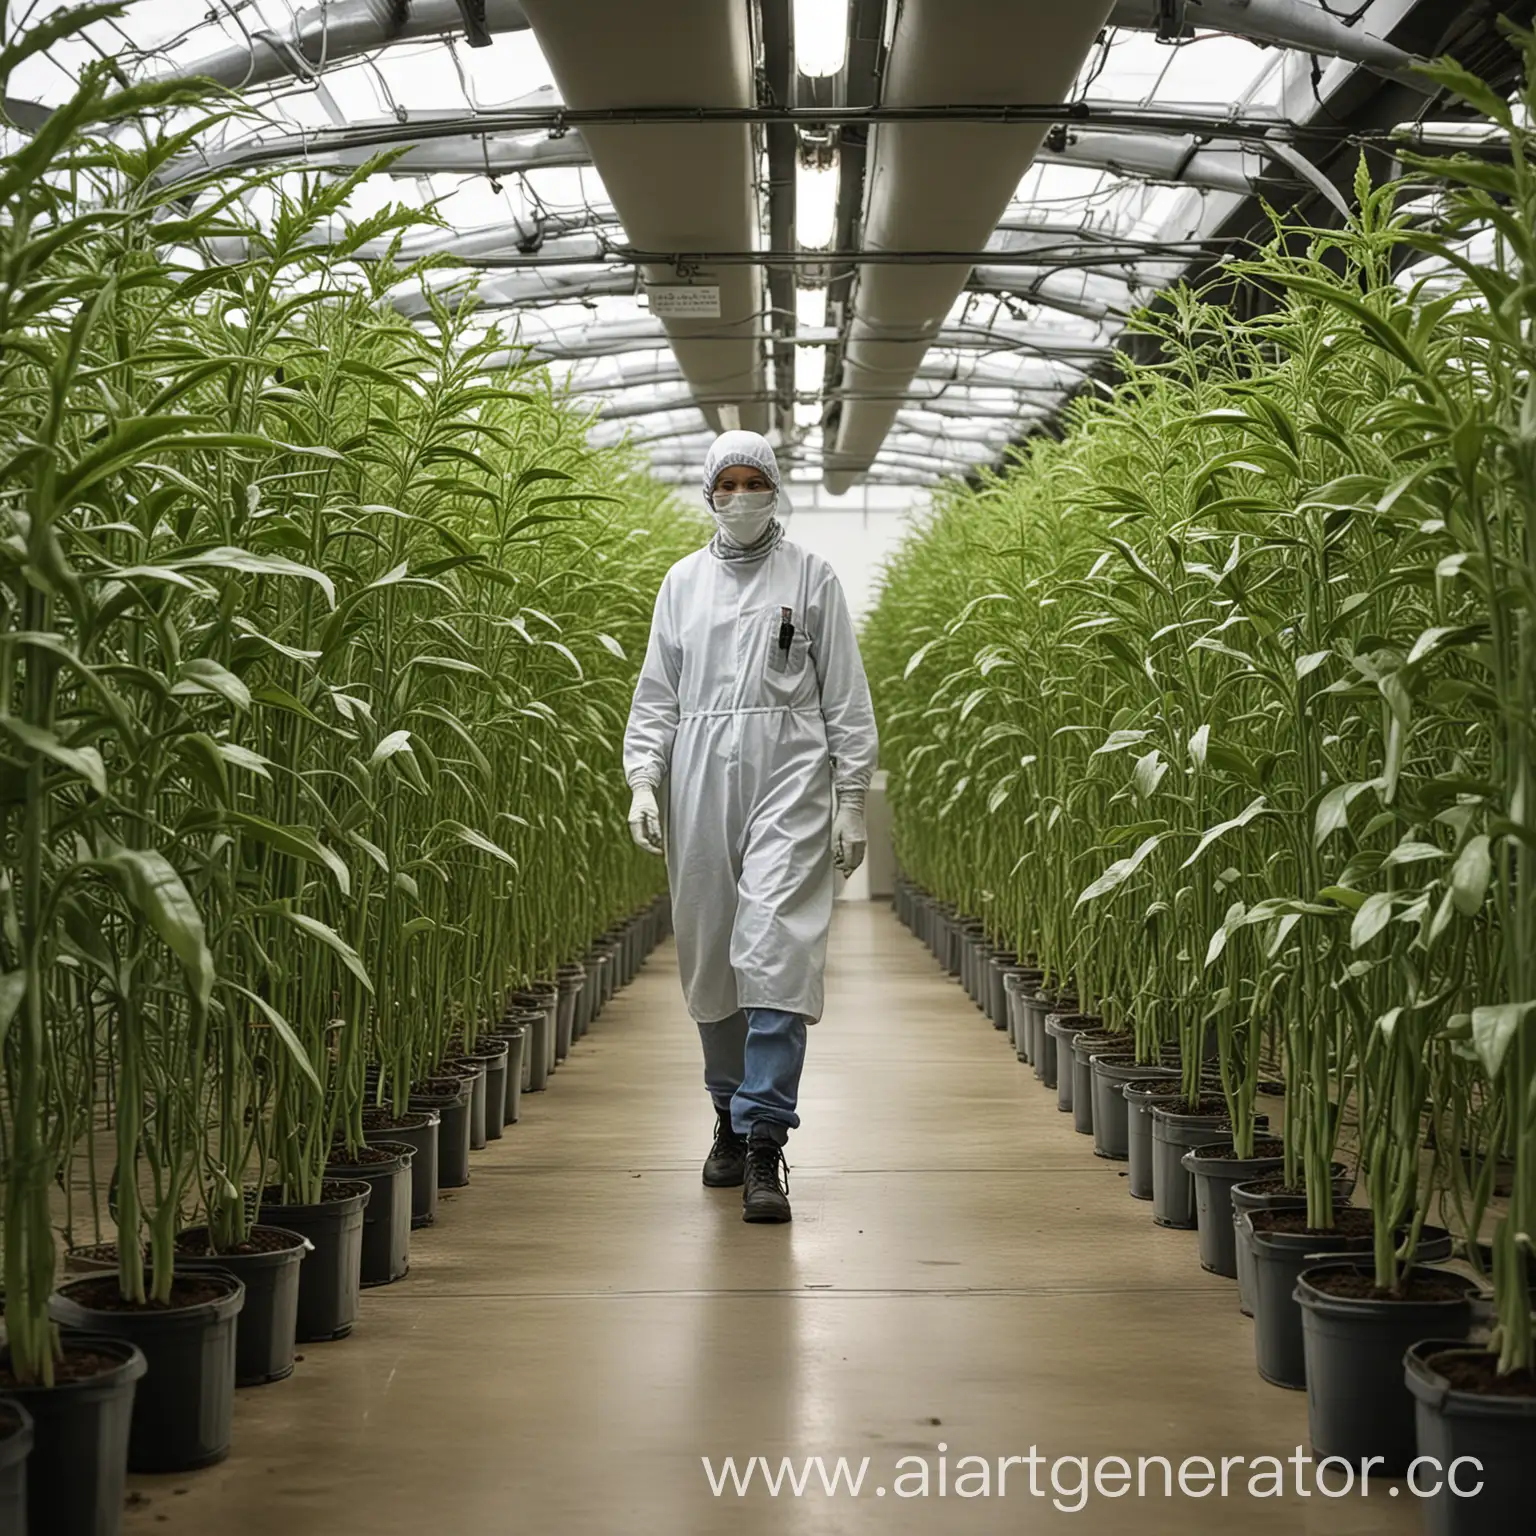 Futuristic-Genetically-Modified-Plants-in-a-HighTech-Environment